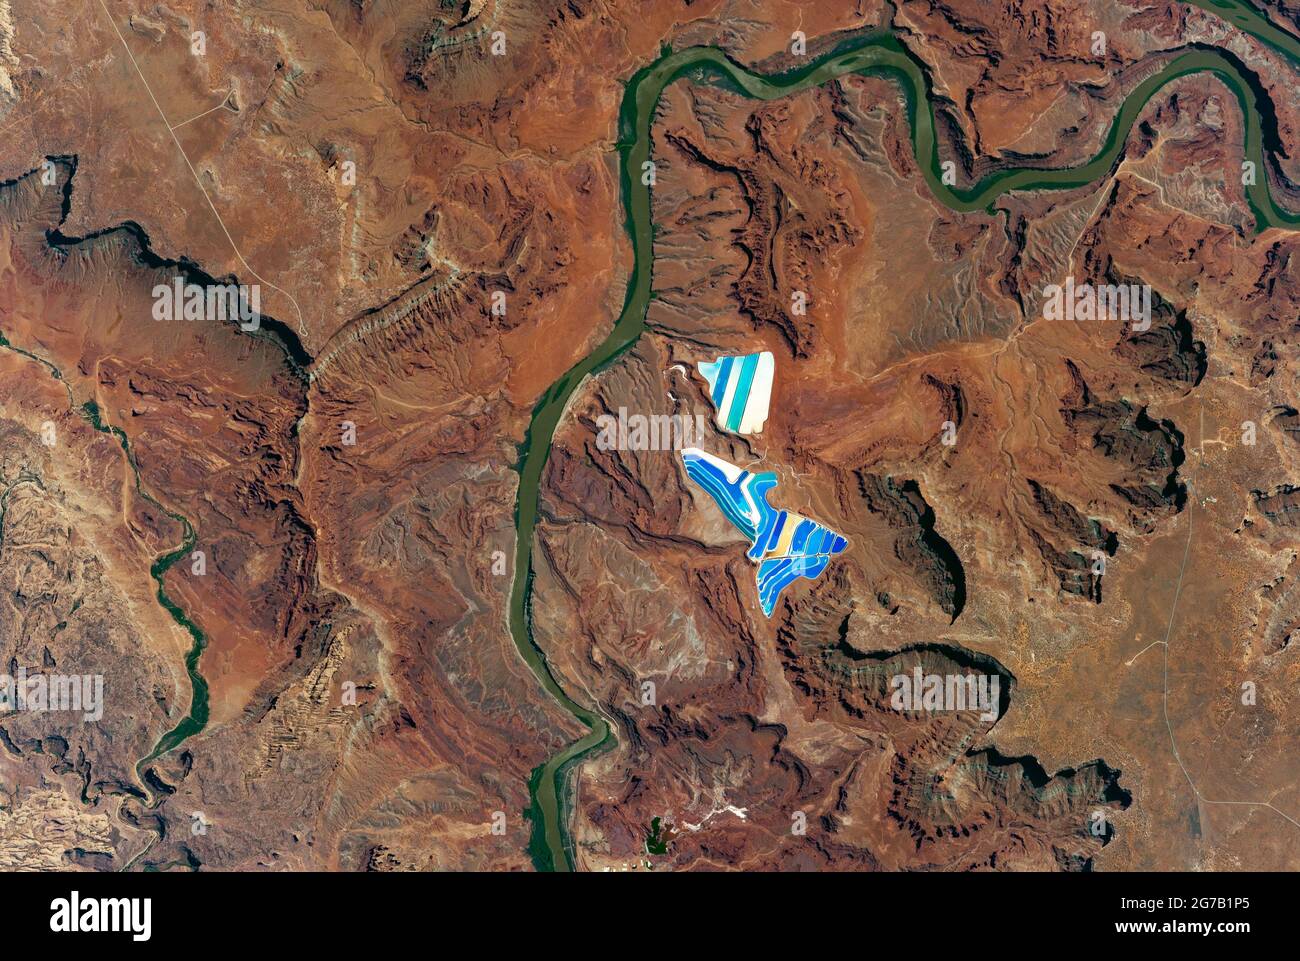 Solar evaporation ponds outside the city of Moab, Utah, USA, looking like broken blue and white porcelain in the soil. Photographed from the International Space Station (ISS). There are 23 colourful ponds spread across 400 acres, part of a large operation toÊmine potassium chloride, high in demand as fertilizer. The Colorado Plateau. 26 June 2017.  An optimised and digitally enhanced version of an NASA image / credit NASA Stock Photo